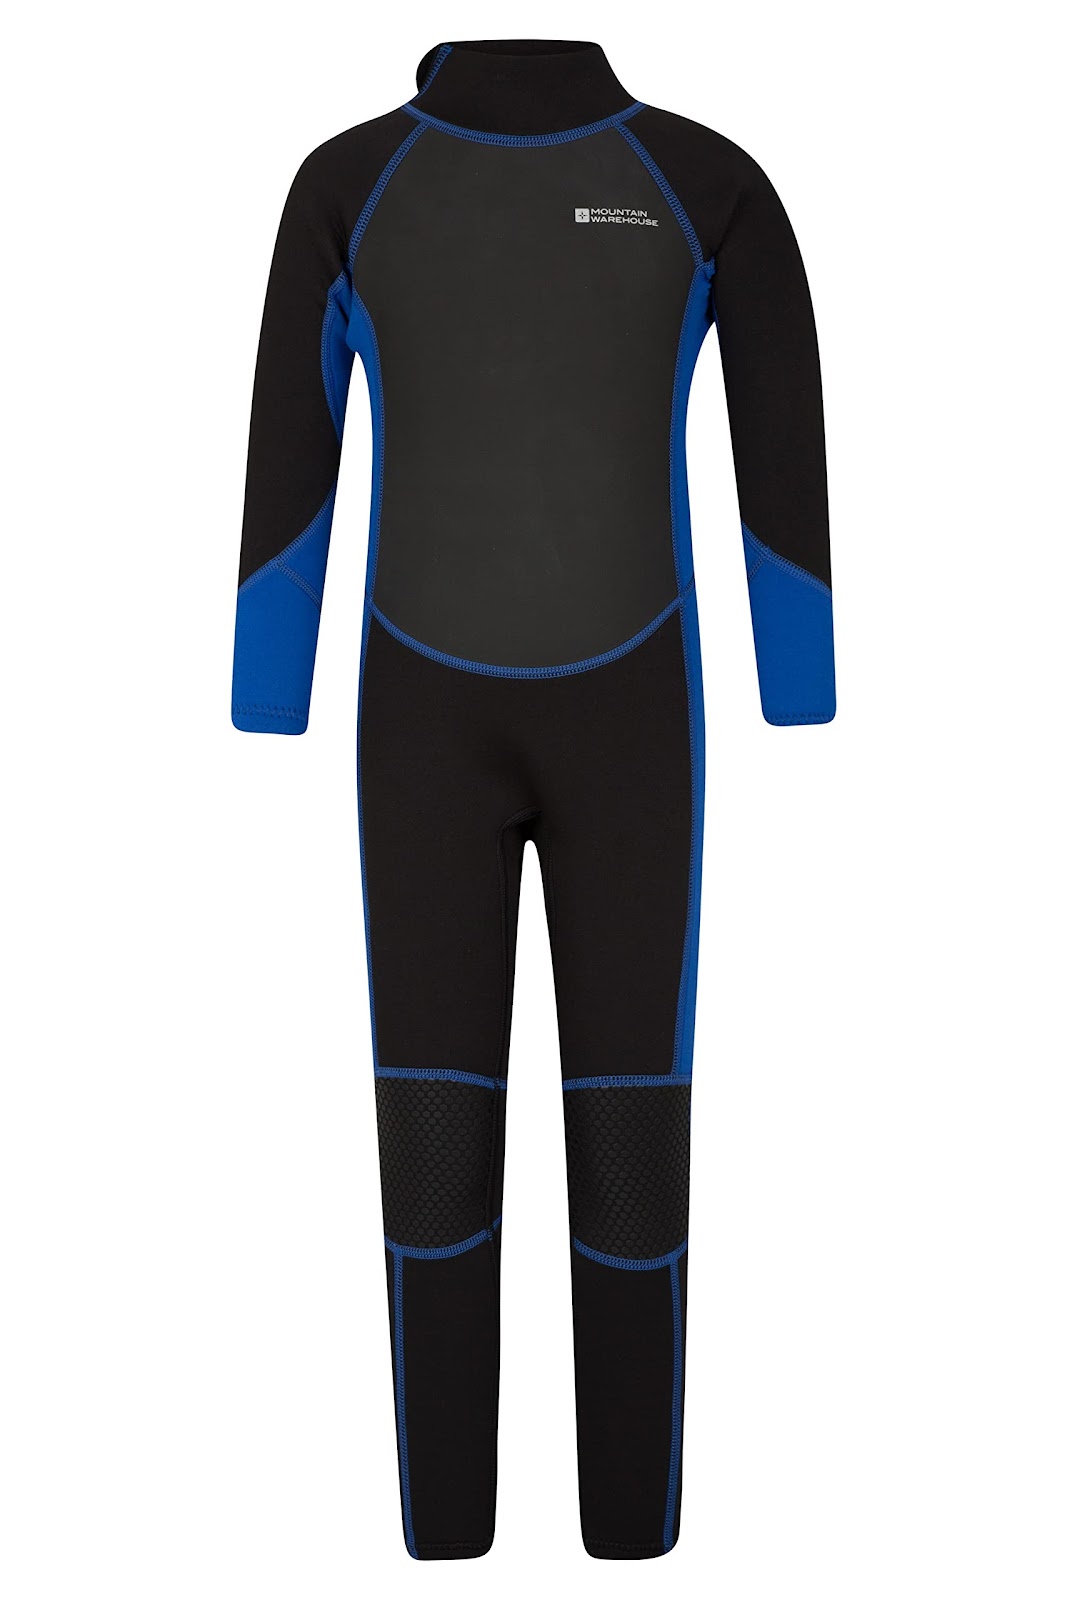 Mountain Warehouse Kids Full childrens Wetsuits